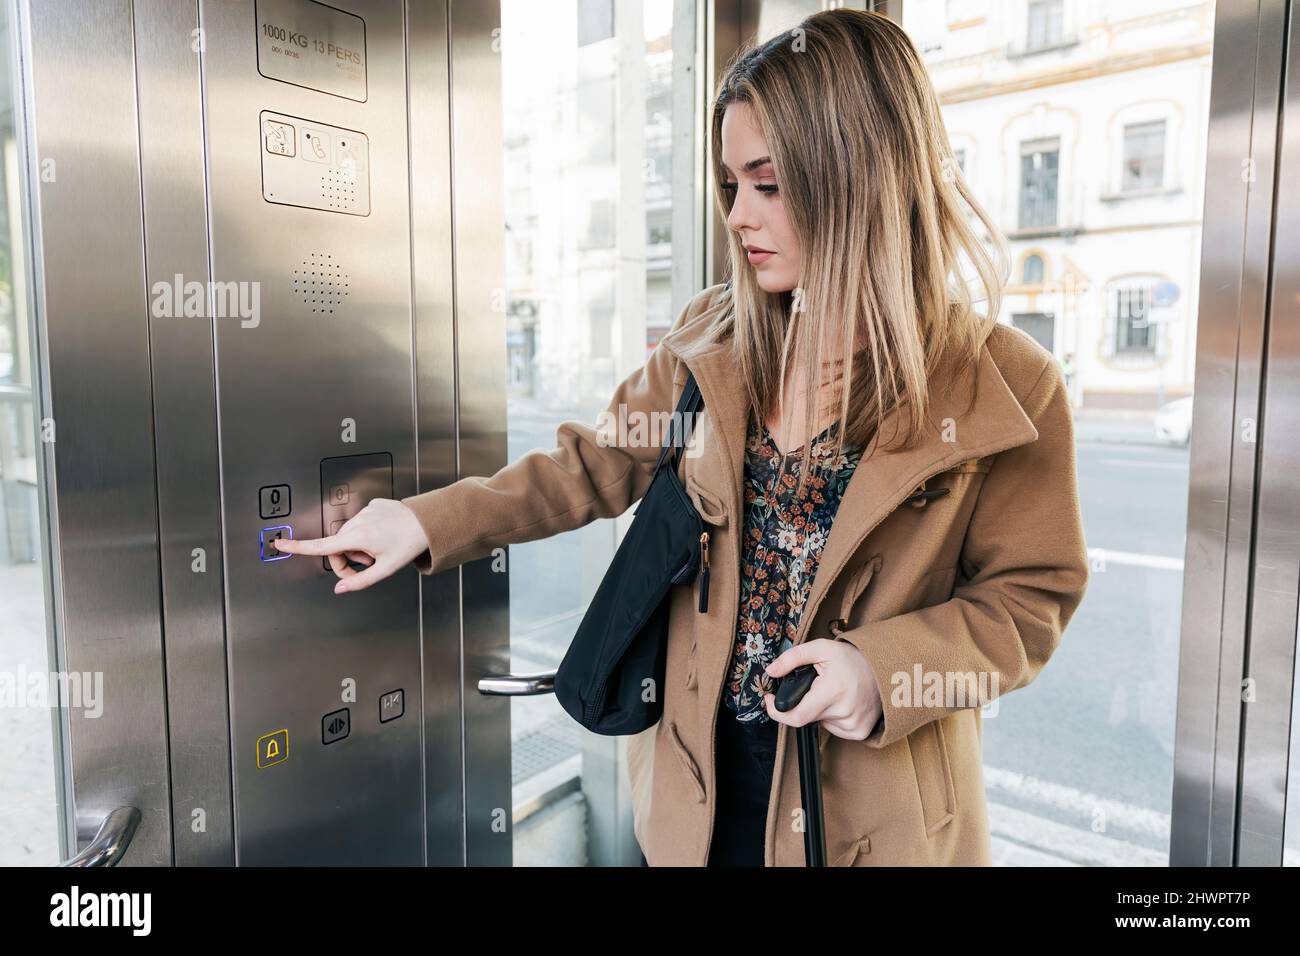 Blond woman pressing button in elevator Stock Photo